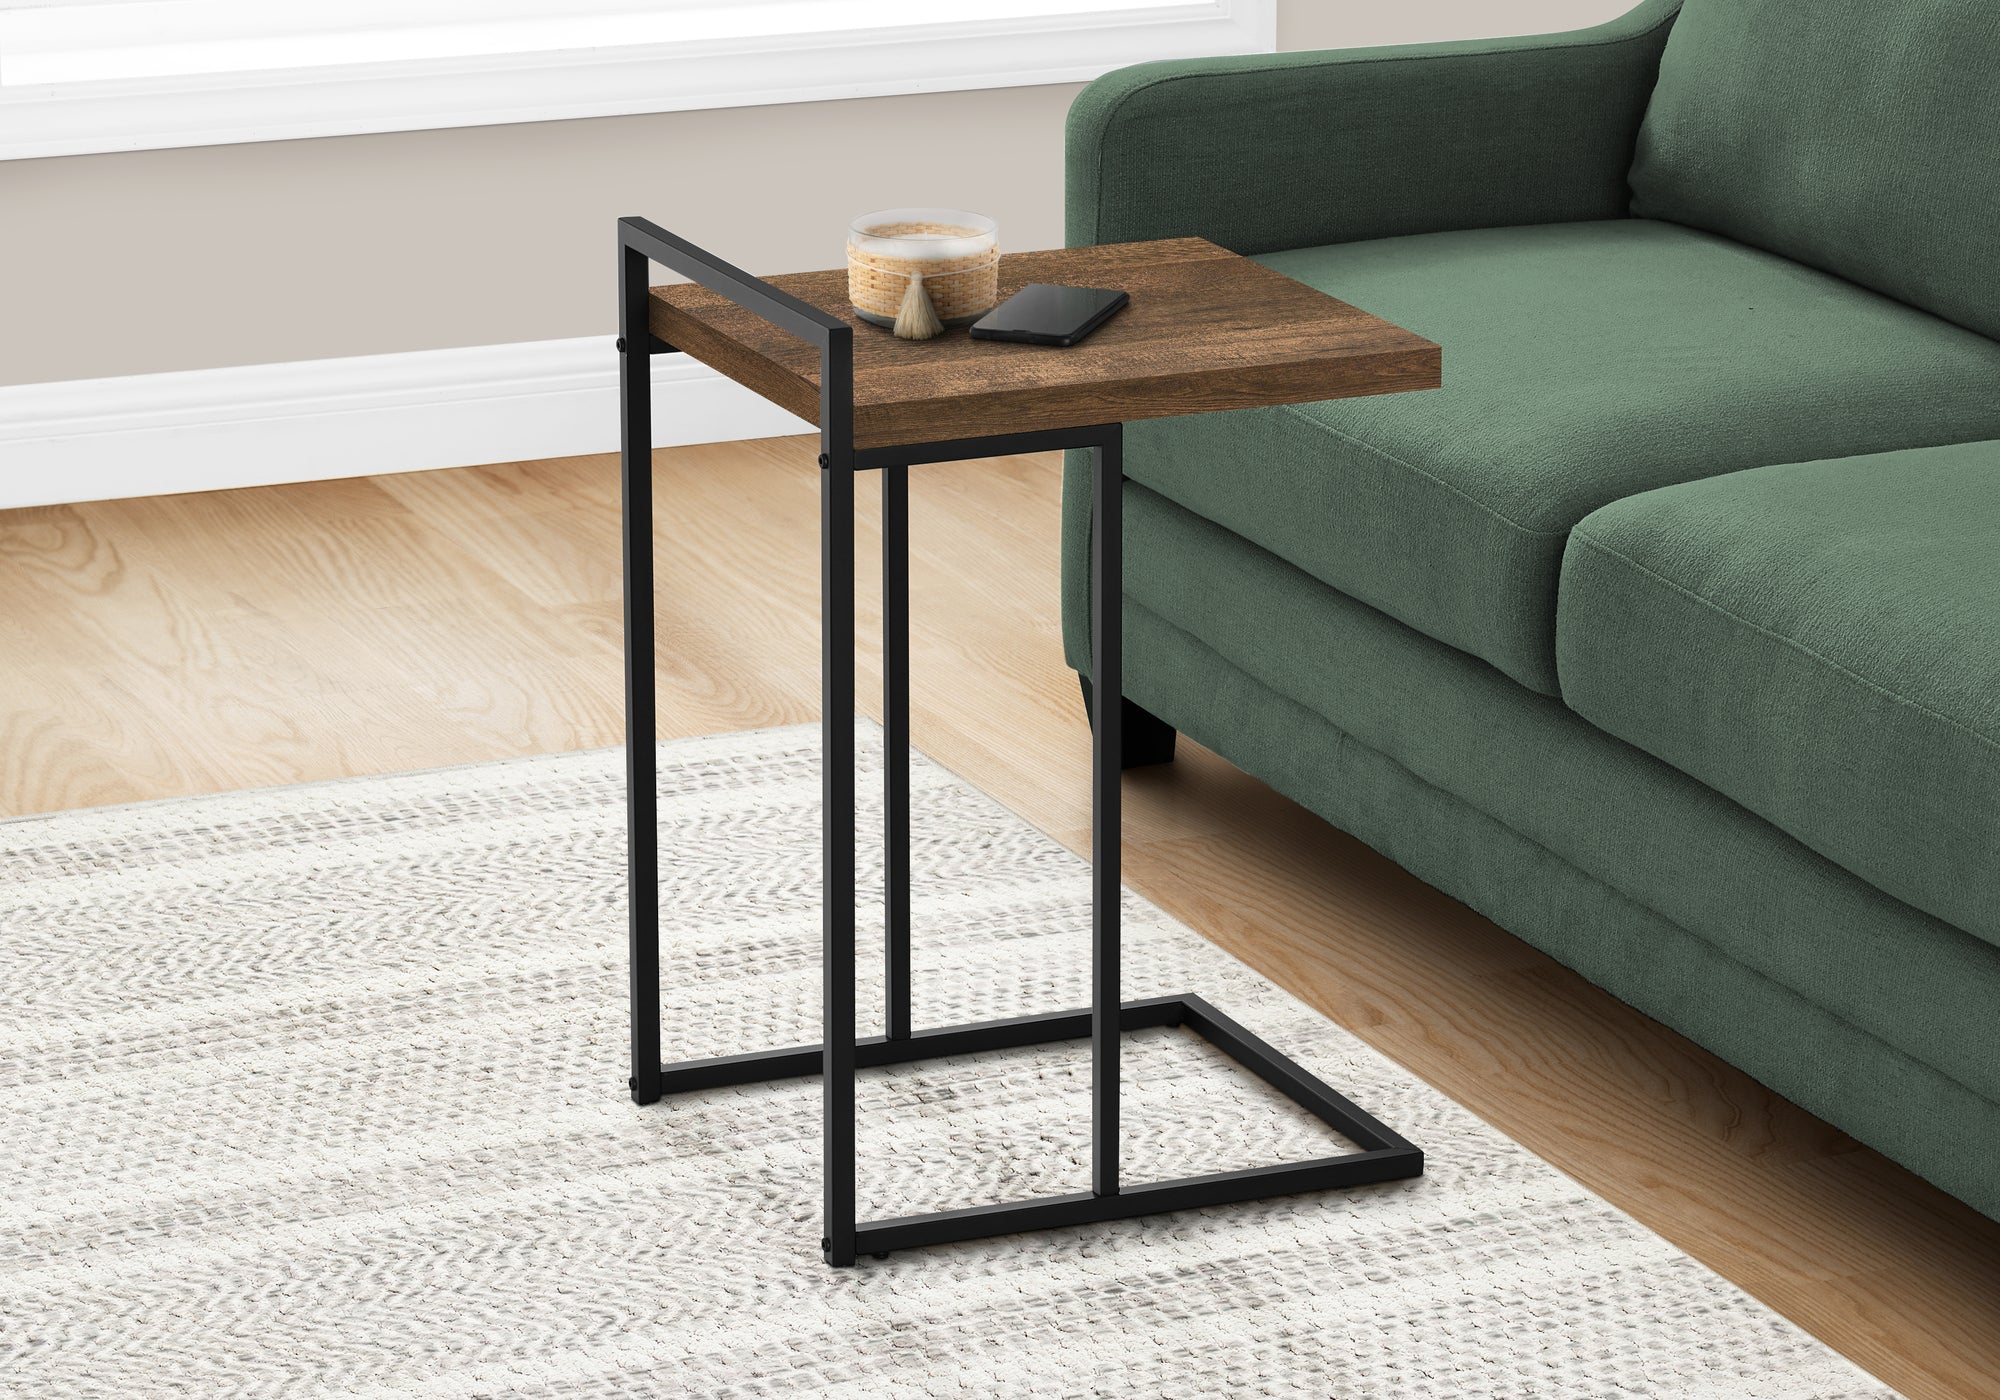 I 3630 - ACCENT TABLE - 25"H / BROWN RECLAIMED WOOD / BLACK METAL BY MONARCH SPECIALTIES INC